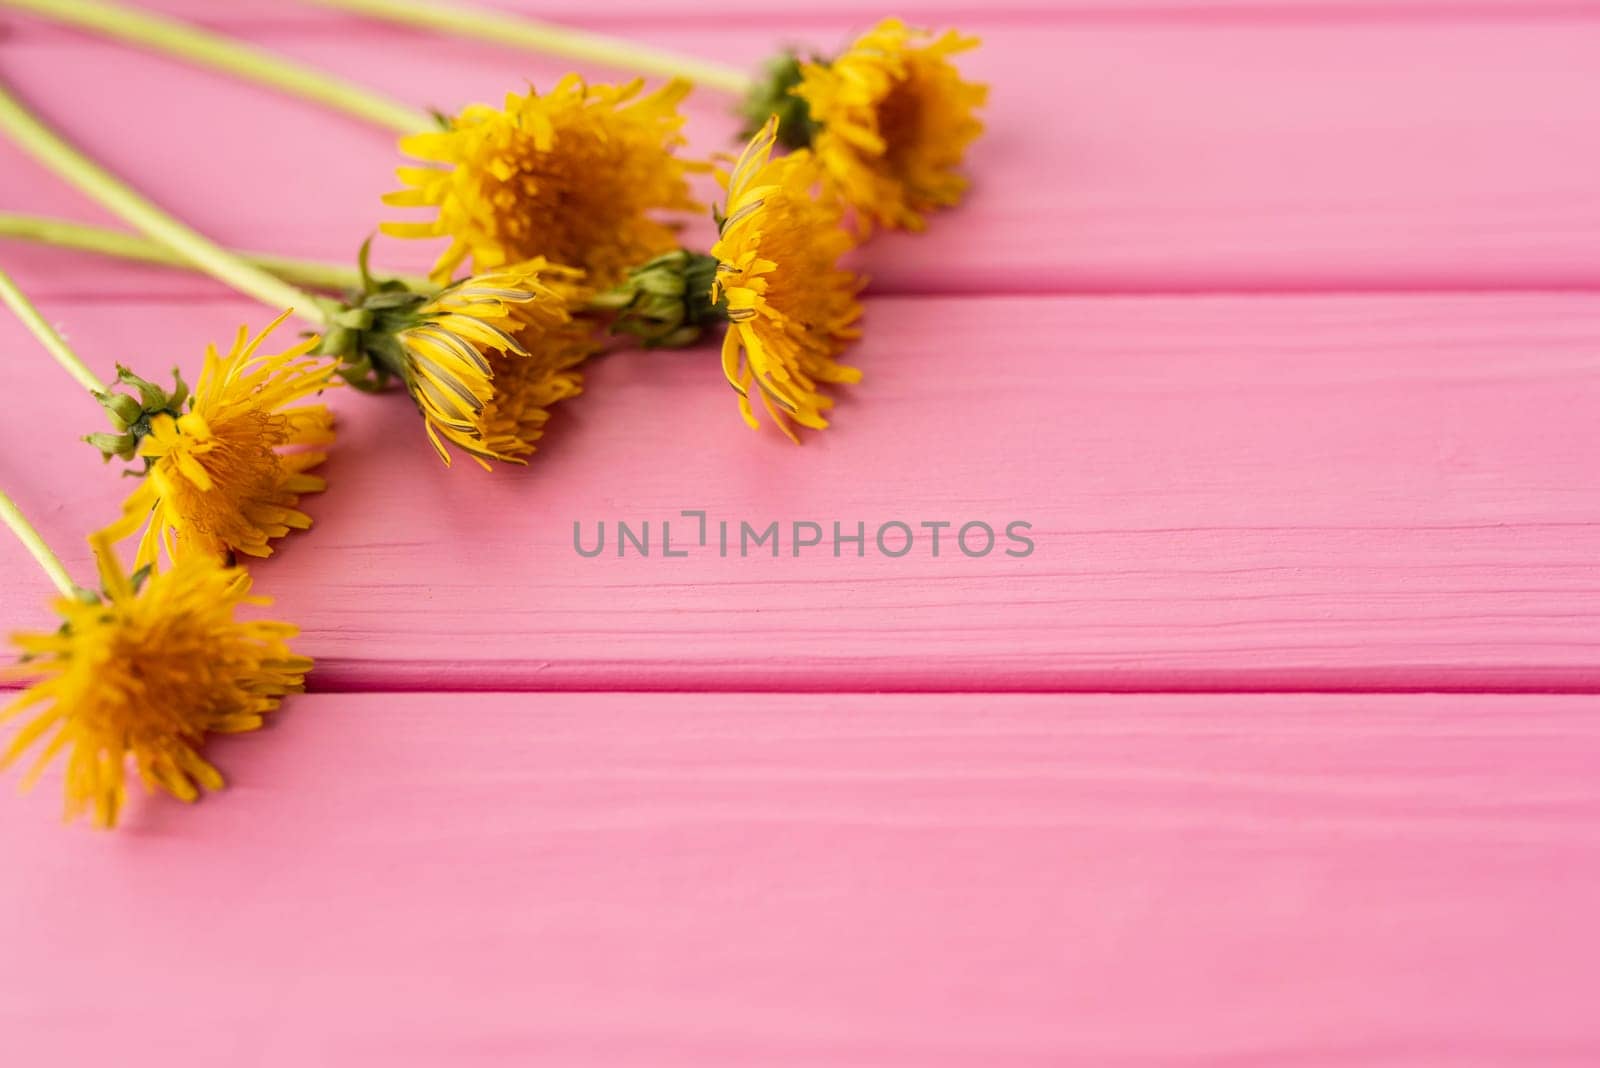 Summer abstract background mockup template free copy space text pattern sample top view above on pink wooden board. blank empty area for inscription. corners flowers borders frames yellow dandelions